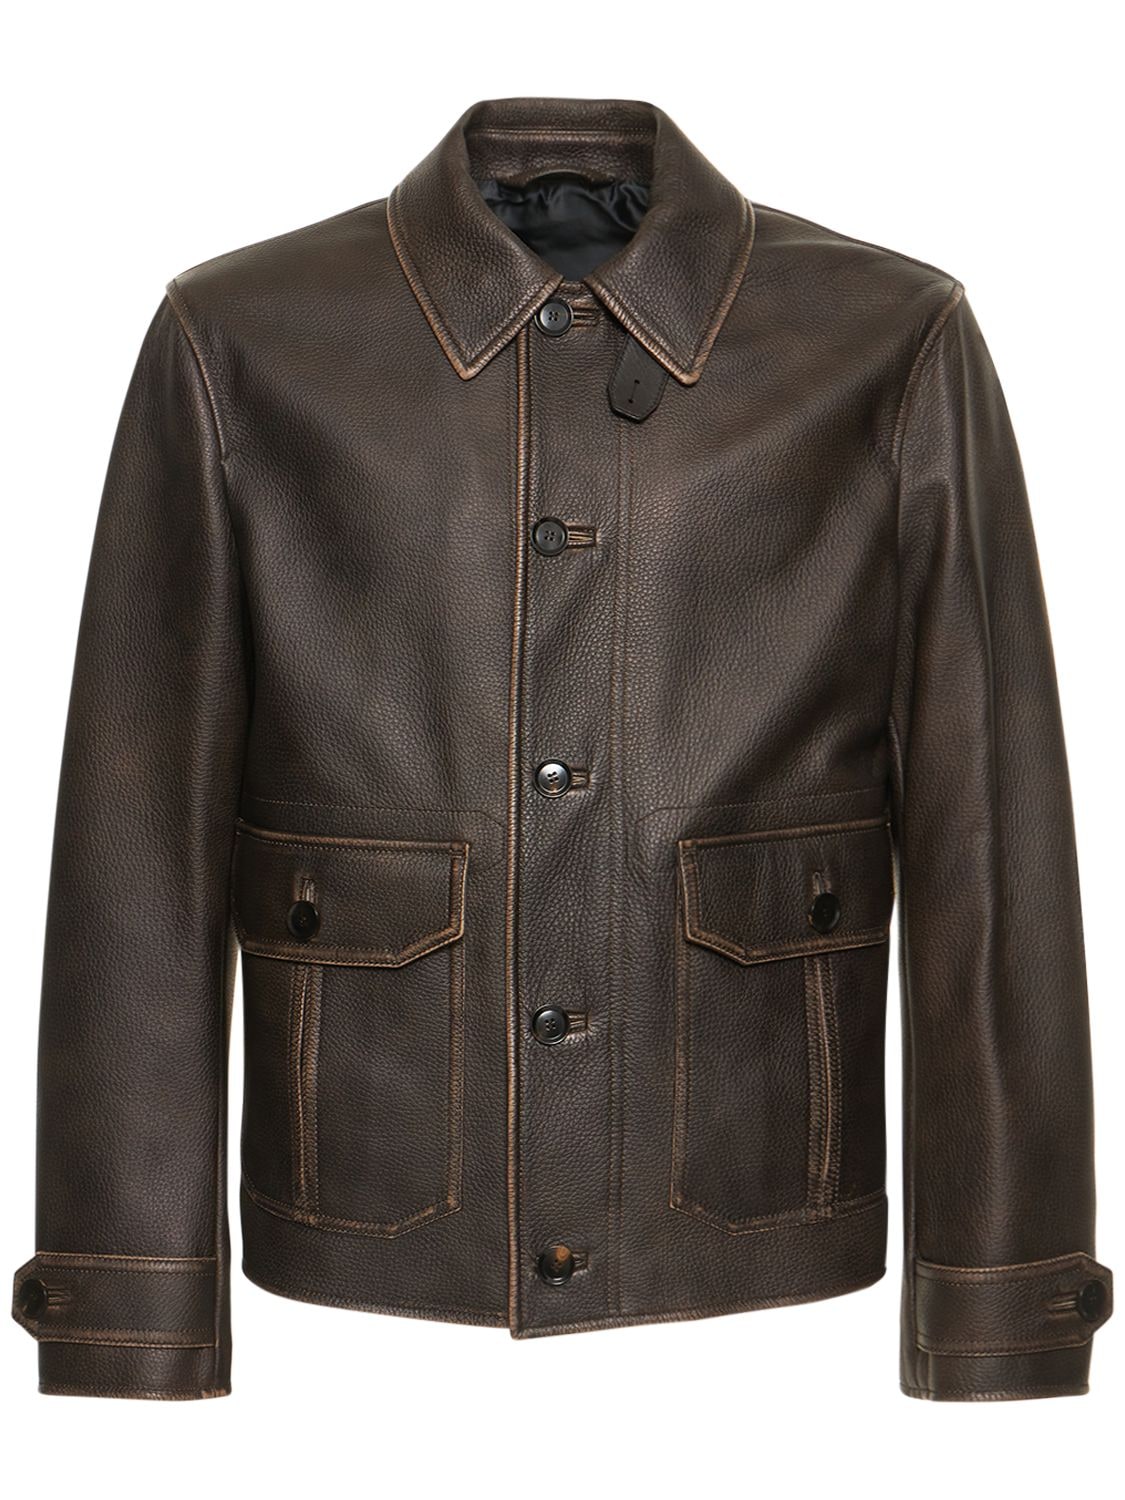 Brioni Leather Jacket In Beige Brown | ModeSens